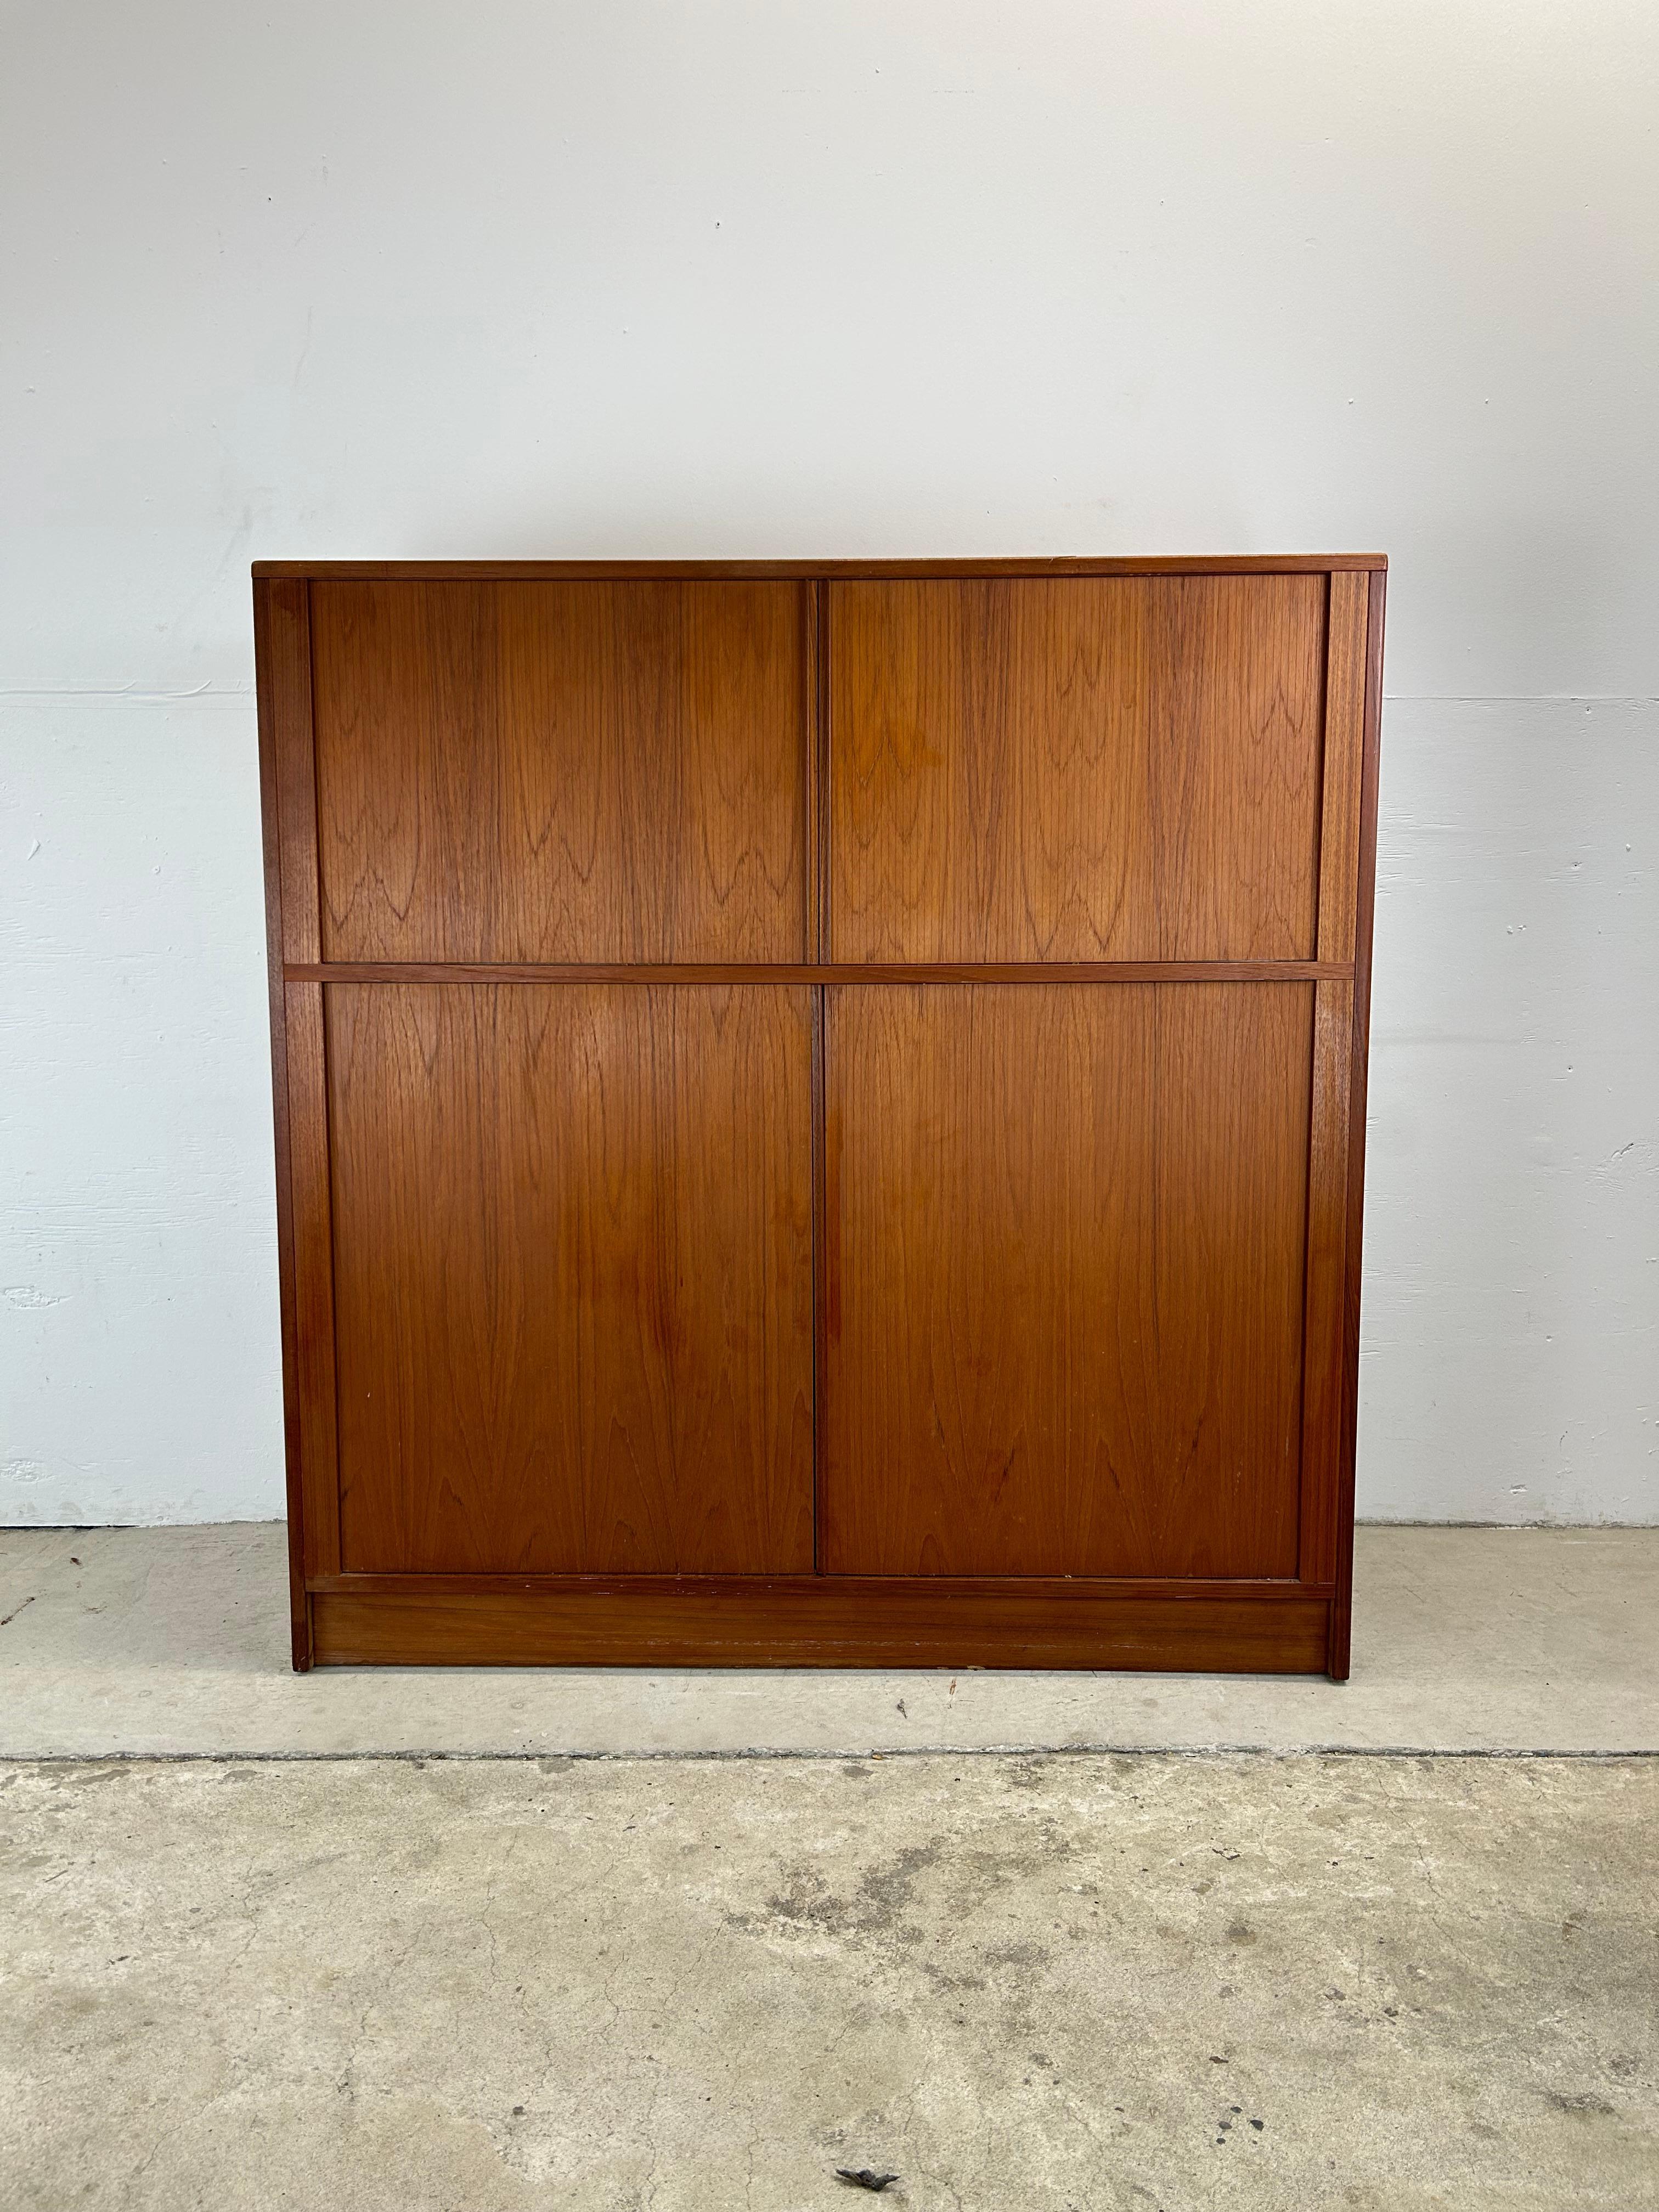 This Danish Modern Gentleman's chest features pressed wood construction, teak veneer with original finish, 4 tambour doors (2 top, 2 bottom), eleven dovetailed drawers across the bottom, and two adjustable shelves up top.

Complimentary pair of